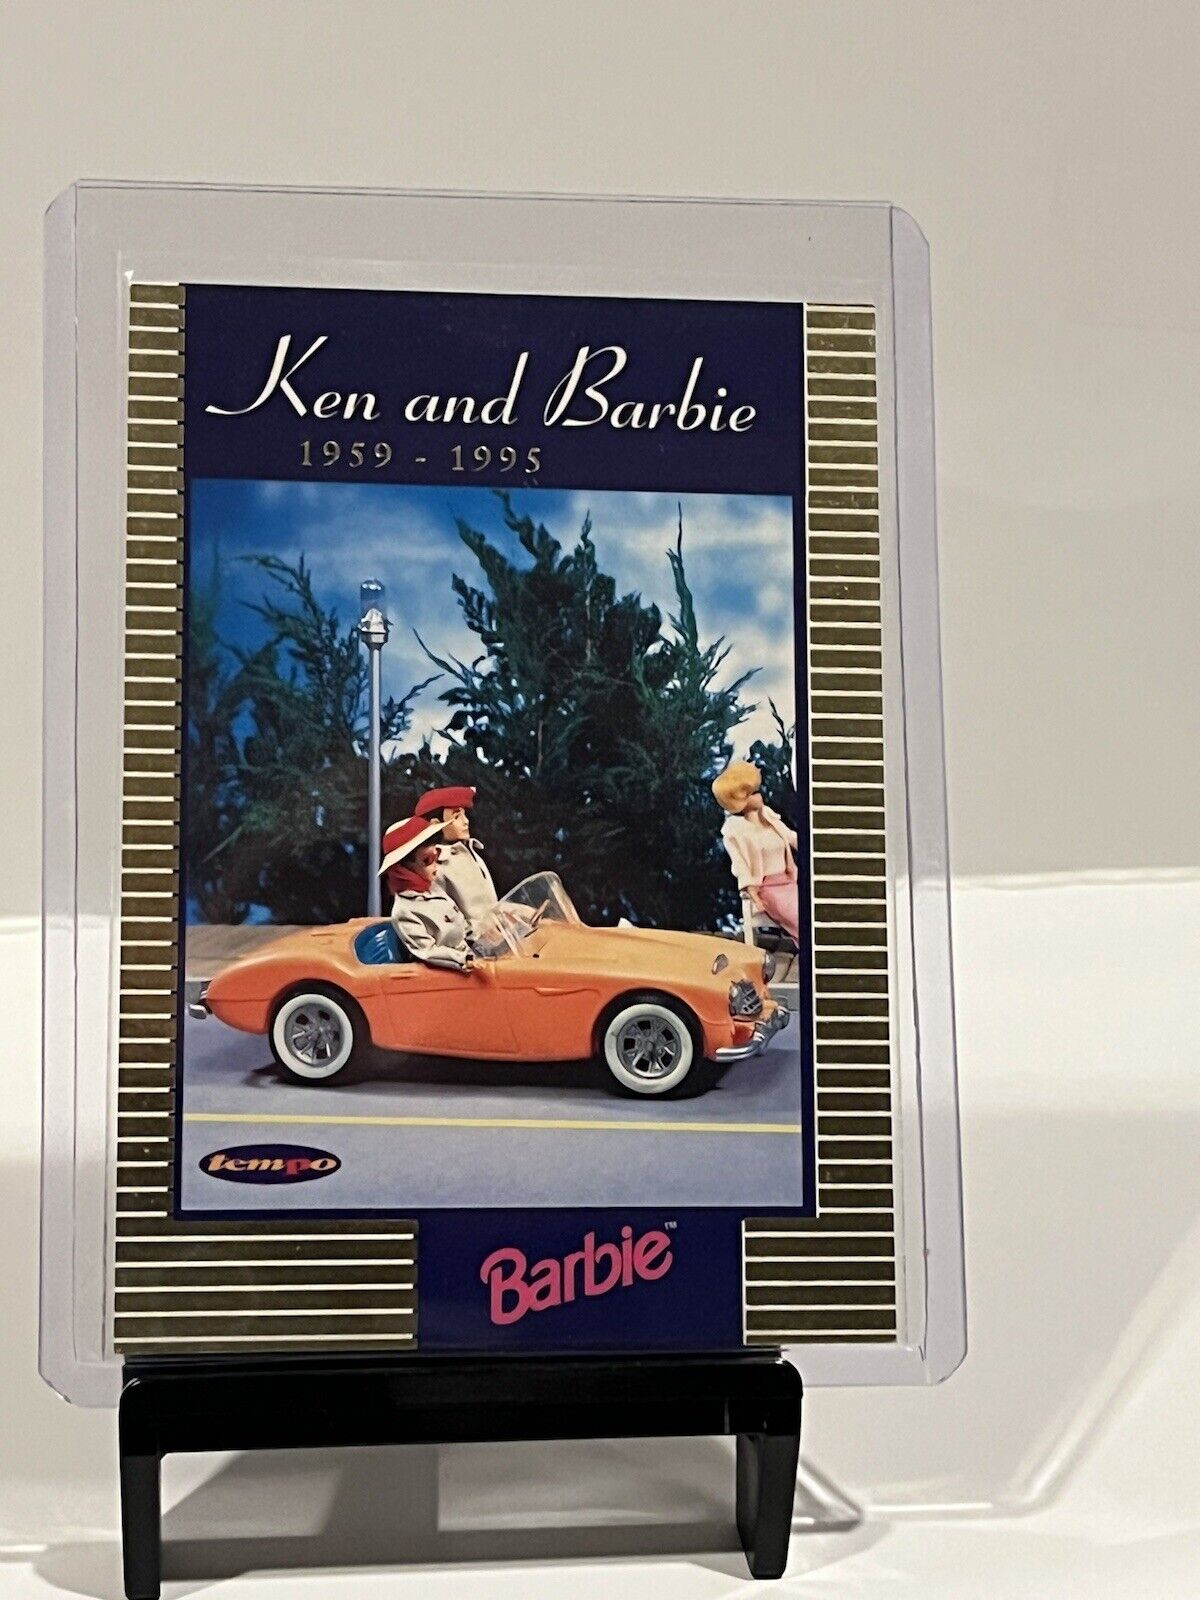 1996 Australia Tempo 36 Years Of Barbie Trading Cards Ken & Barbie Card KB2 1474